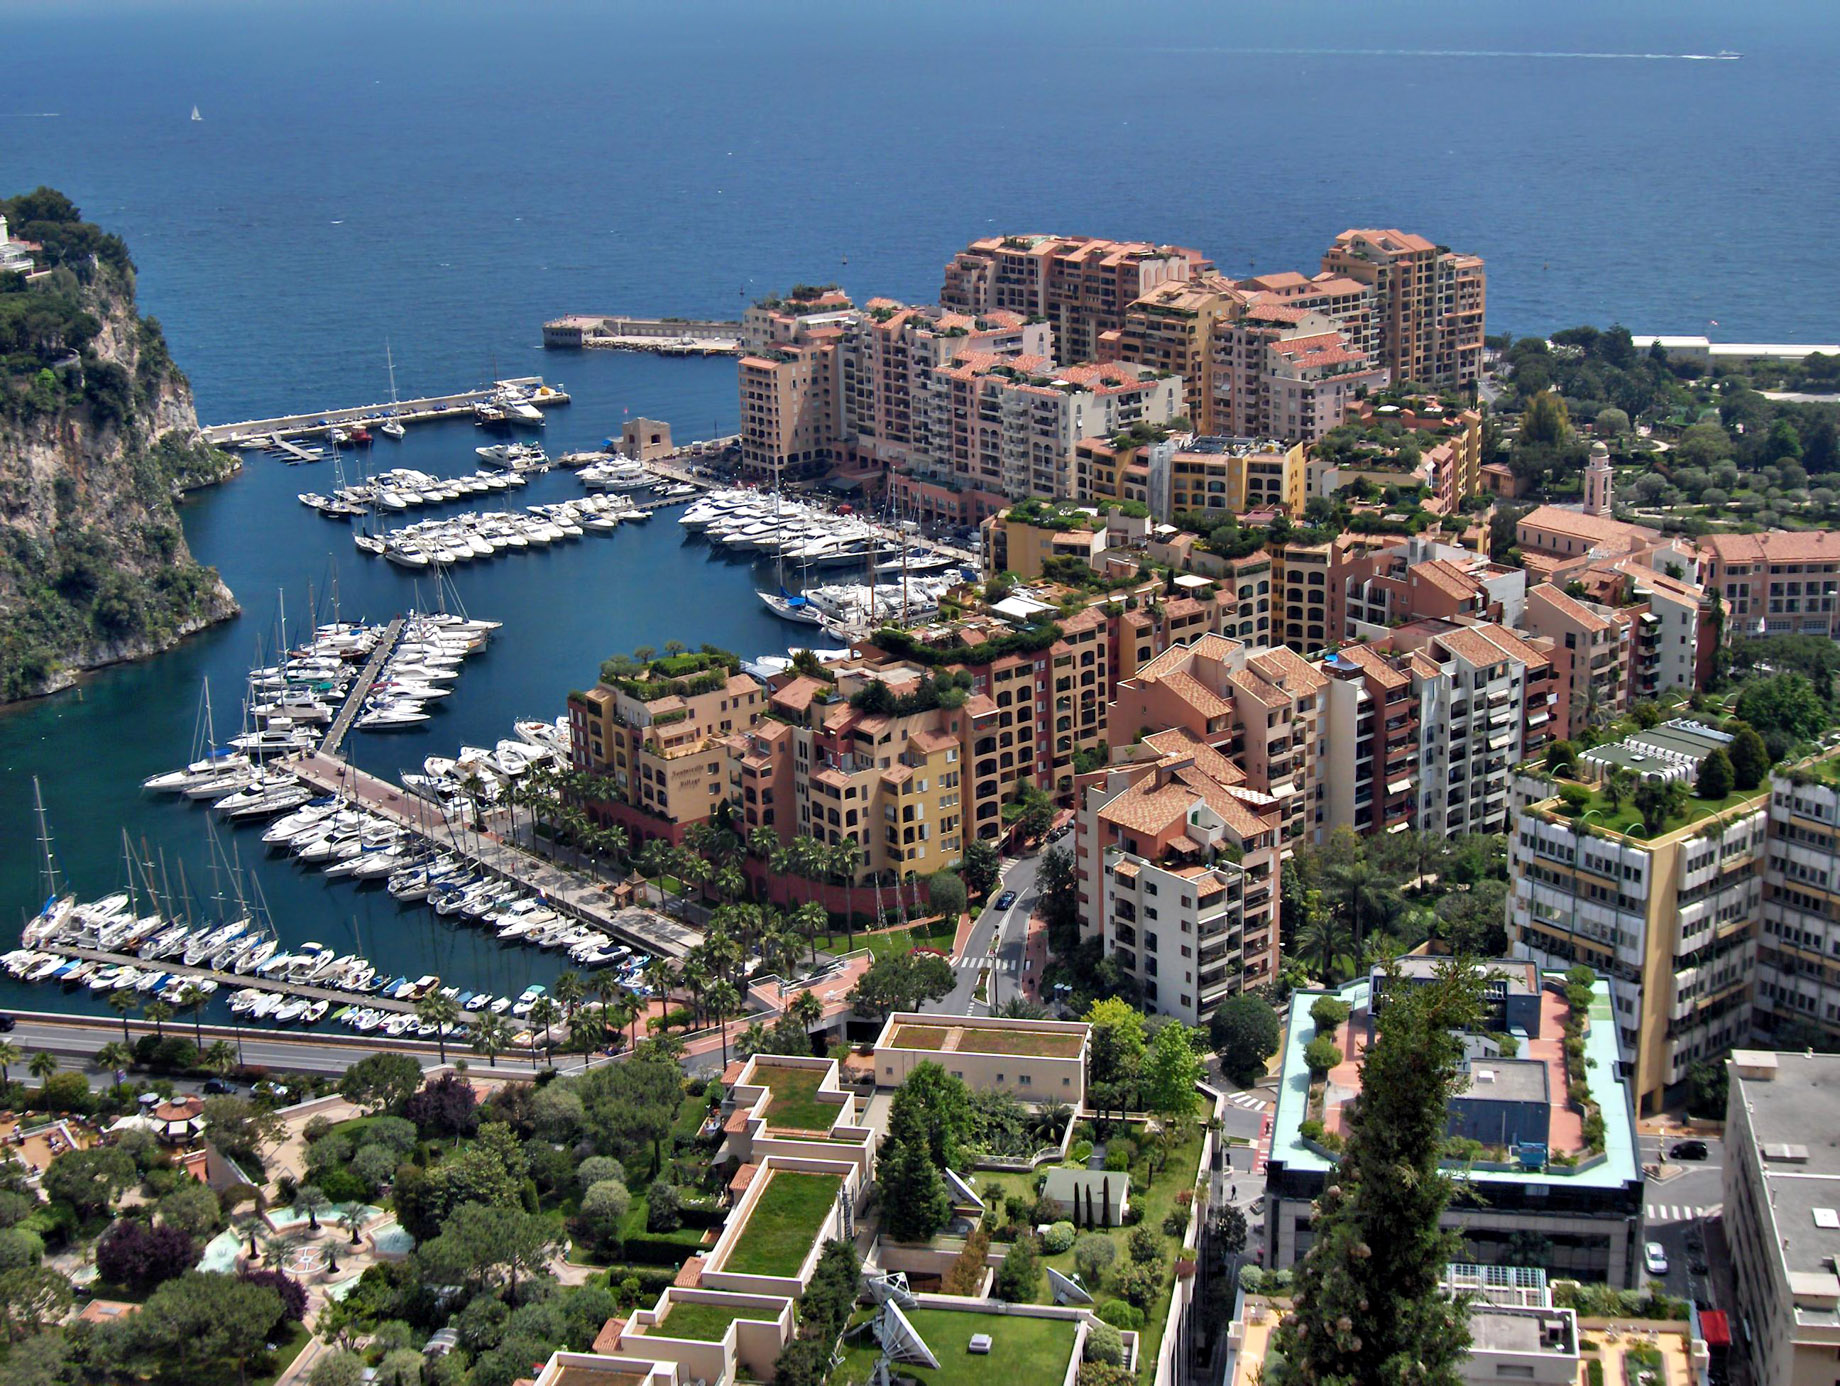 House Hunting in Monaco - Inside One of the Worlds Most Expensive Property Markets